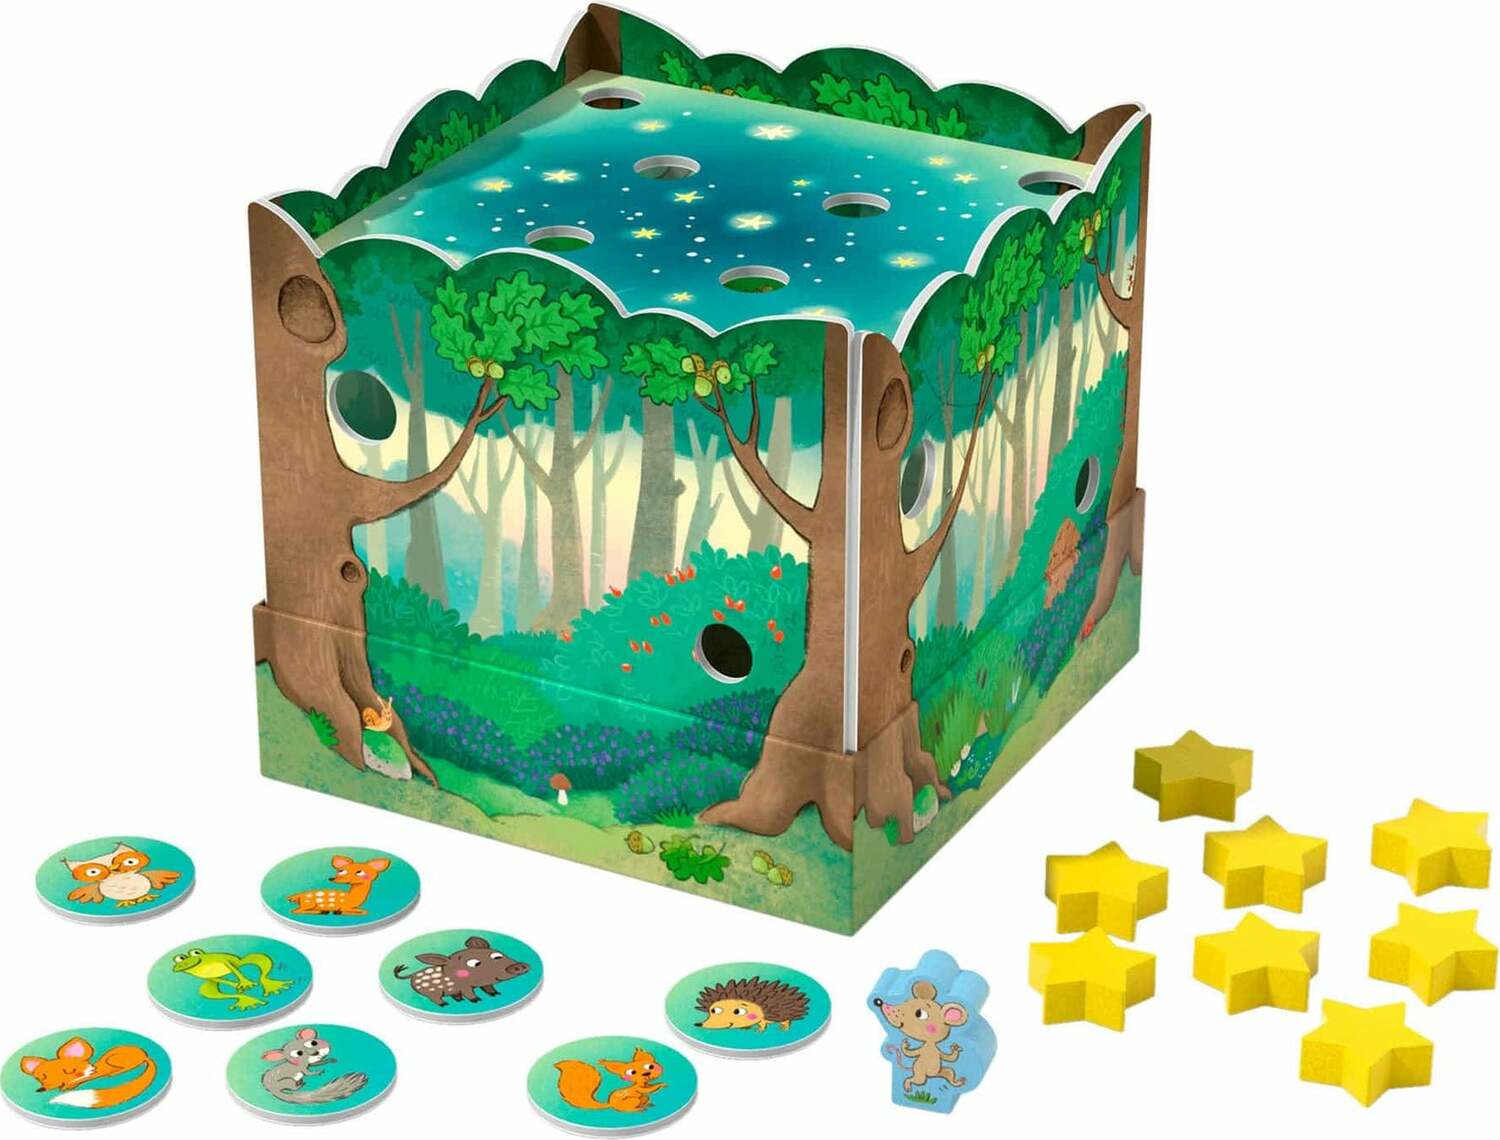 My Very First Games - Forest Friends